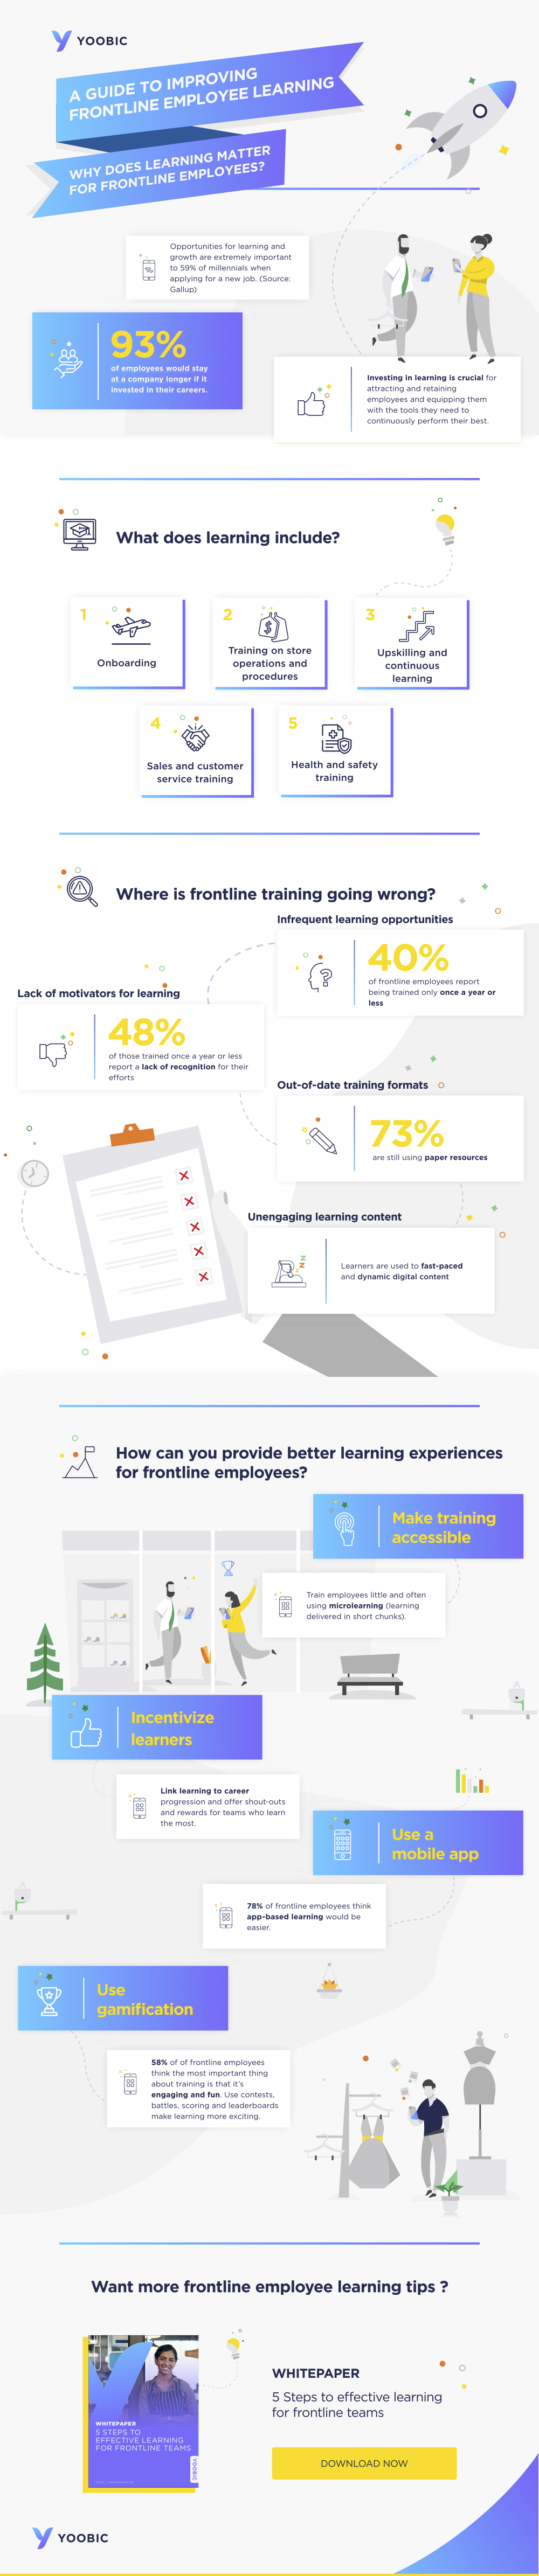 Infographic - Guide to Frontline Employee Learning